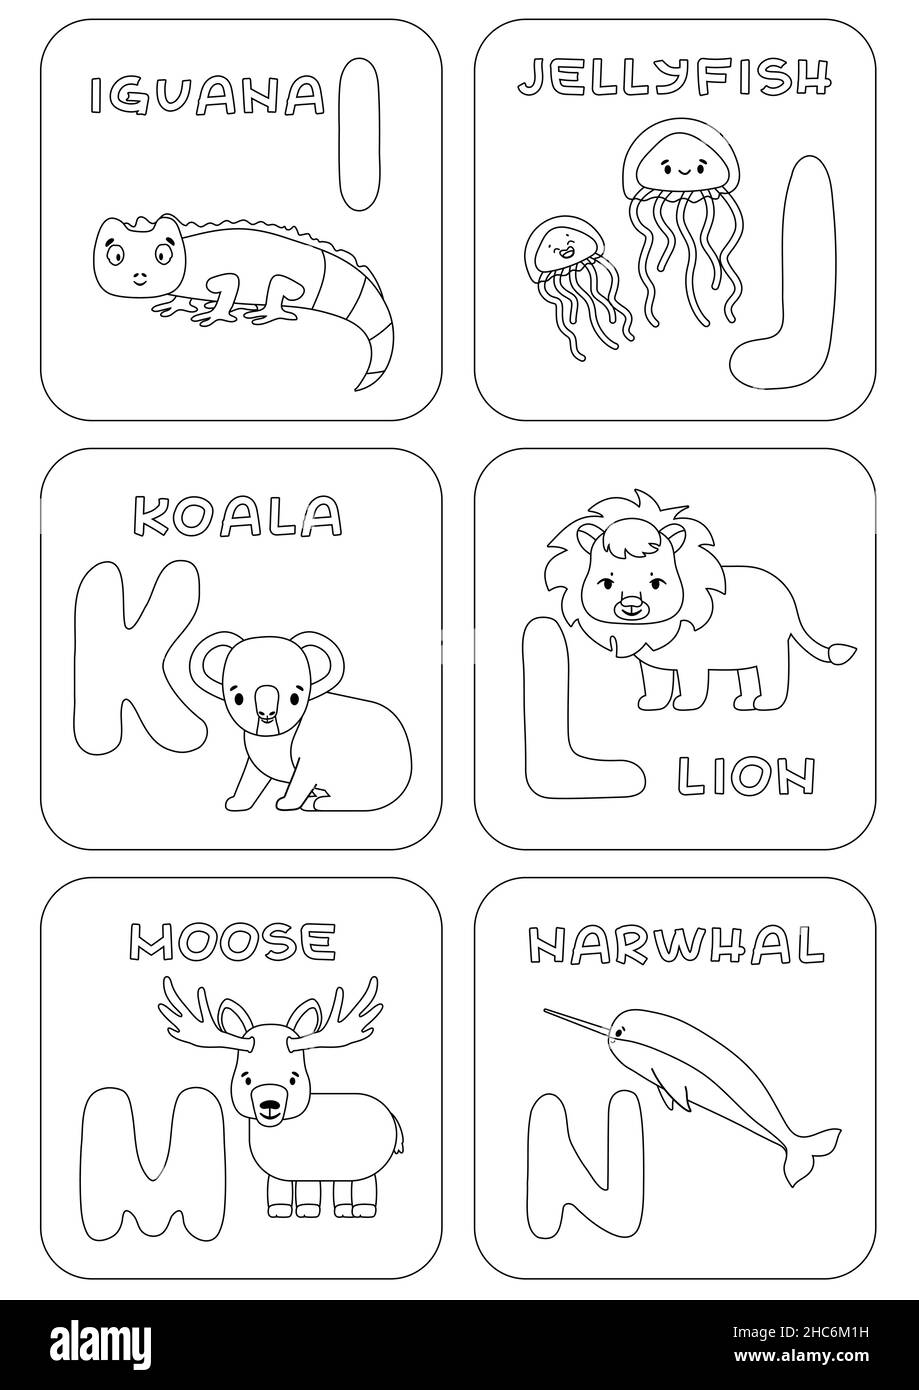 English I-N alphabet family kids game. Coloring pages with animals and letters that can be used for learning, education relax, childish games. Vector Stock Vector